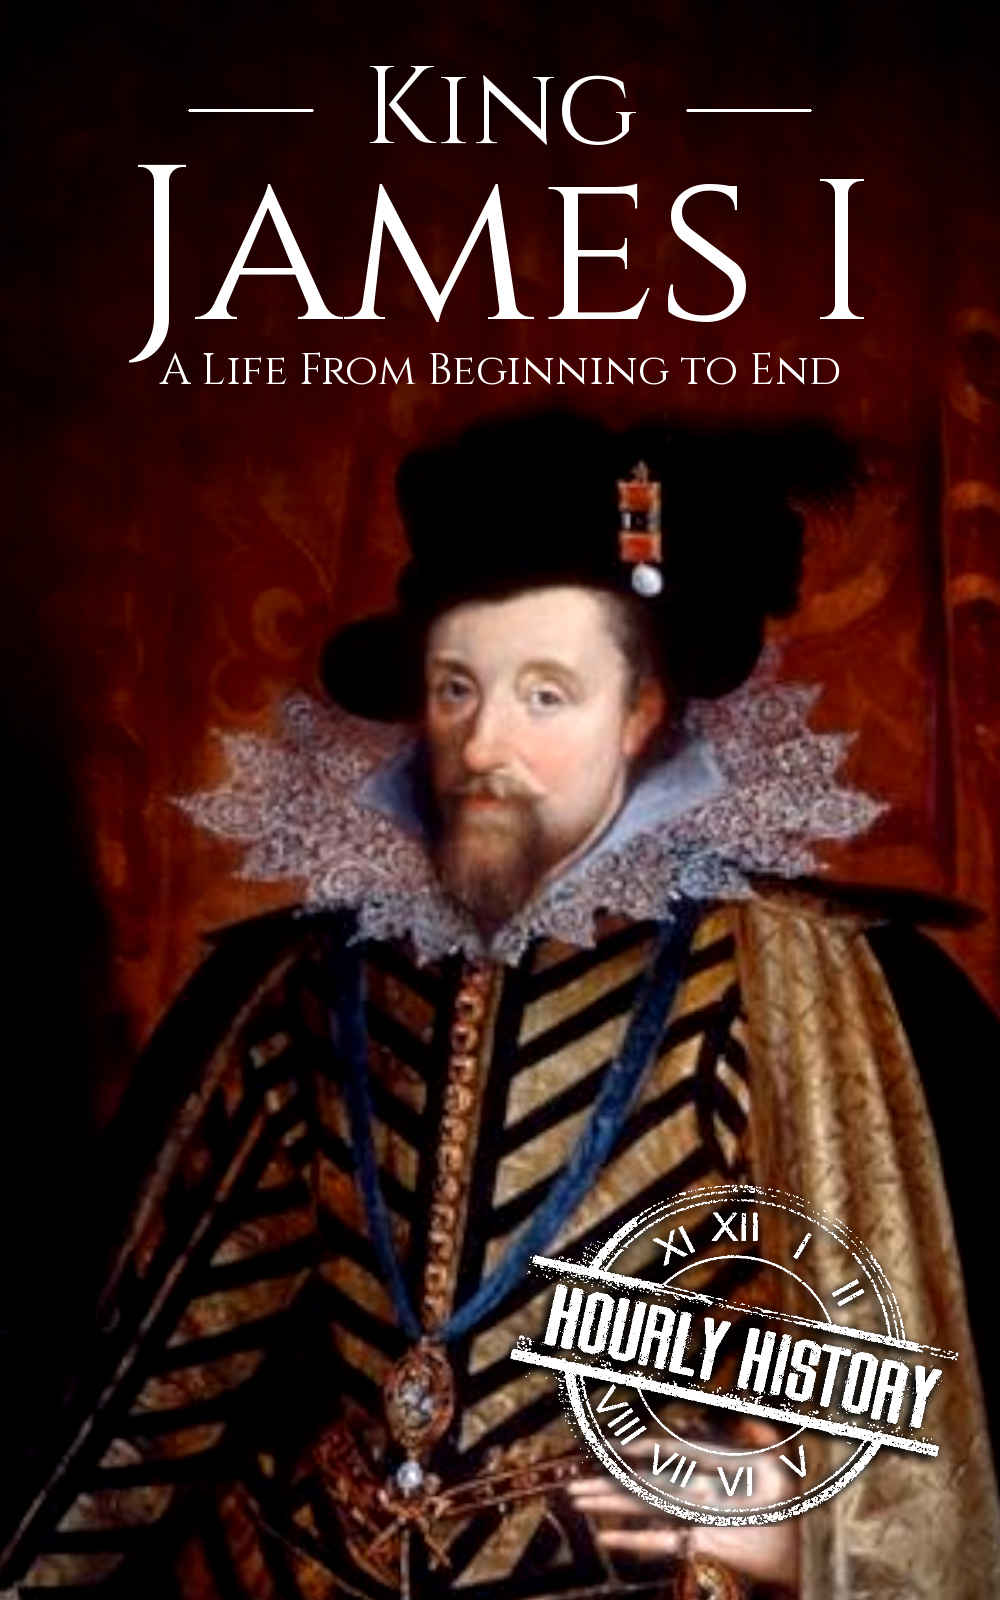 King James I: A Life From Beginning to End (Biographies of British Royalty Book 9)